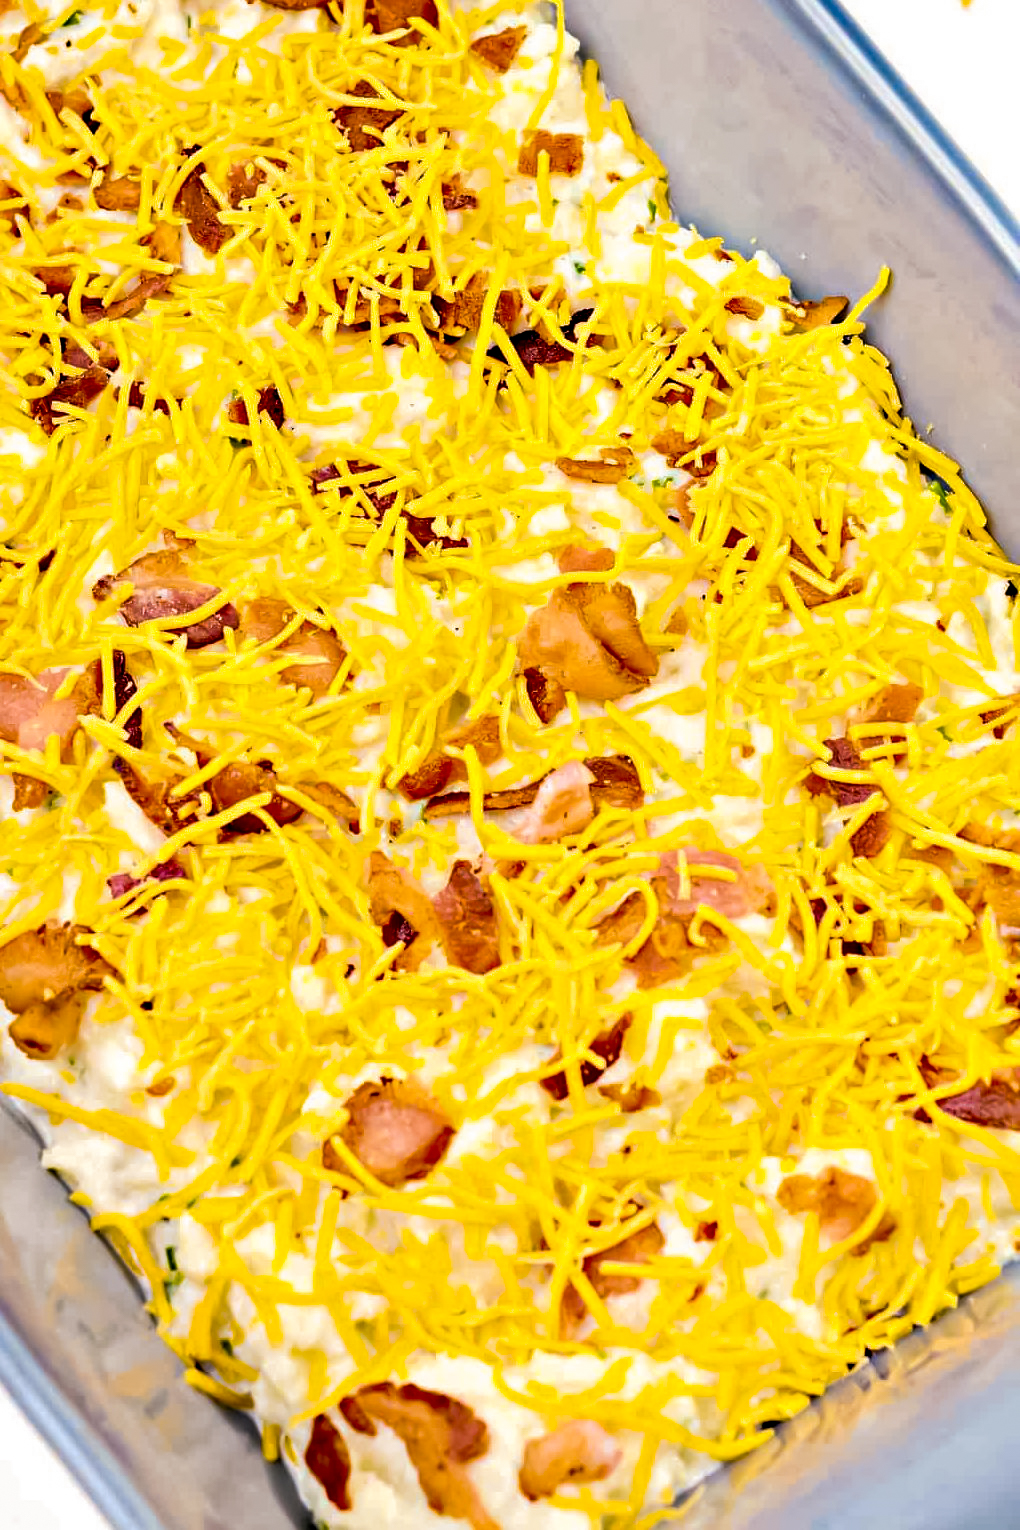 Top the cauliflower with the crumbled bacon and shredded cheese.